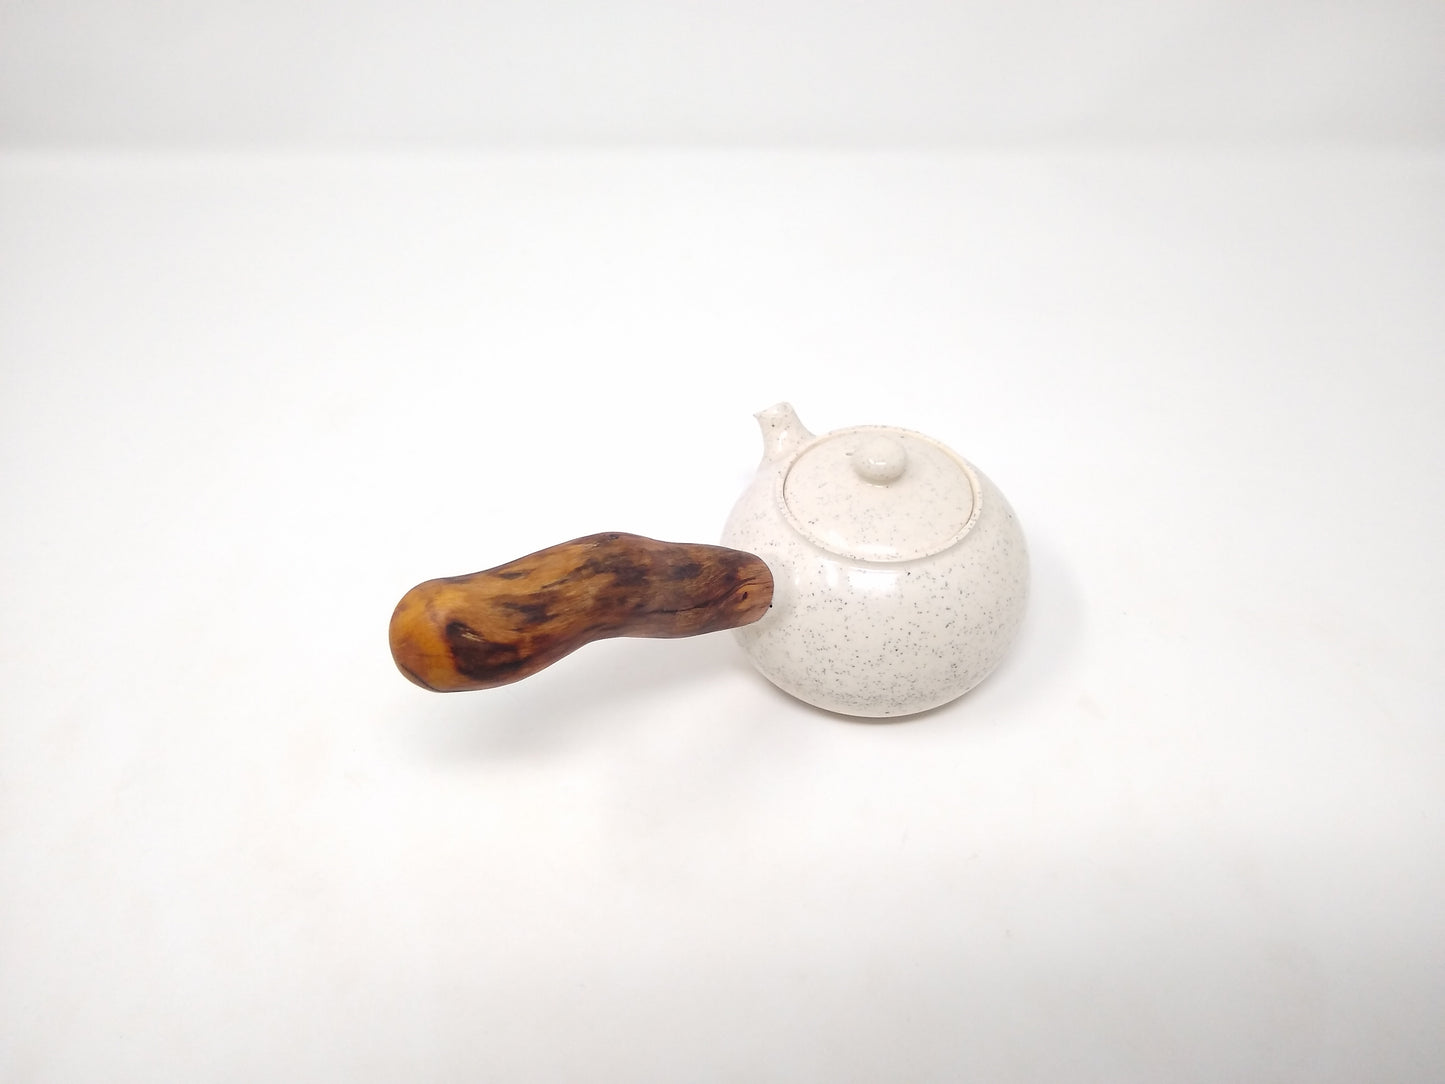 190ml Speckled Porcelain Kyusu with a matching 230ml tea bowl